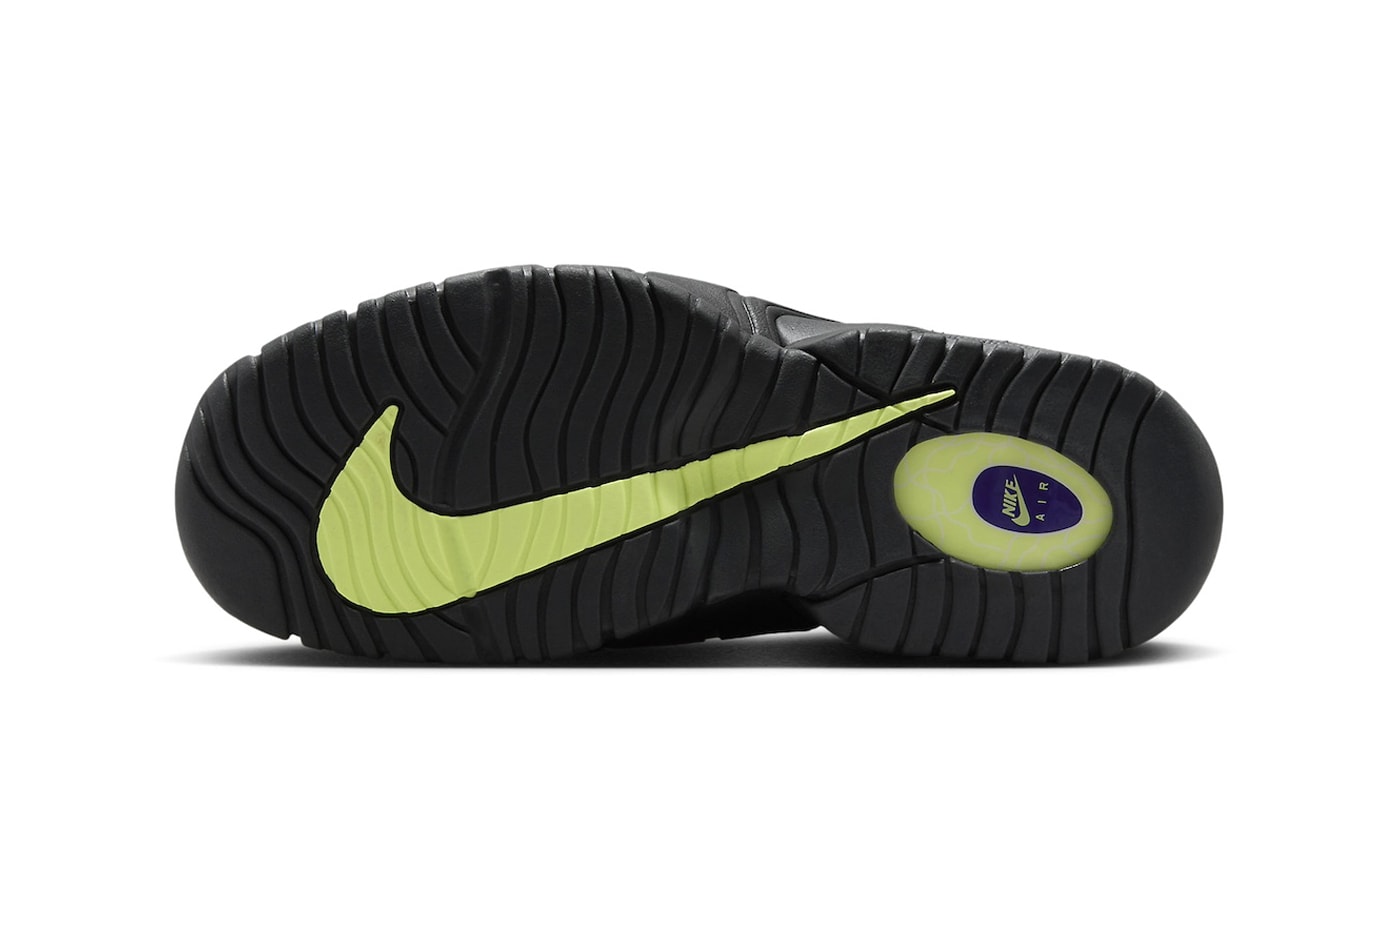 Nike Air Max Penny 1 "Penny Story" Has a 2024 Release Date FZ4043-100 White/Light Lemon Twist-Field Purple-Anthracite february 10 2024 penny hardaway stussy swoosh high tops basketbal lshoes